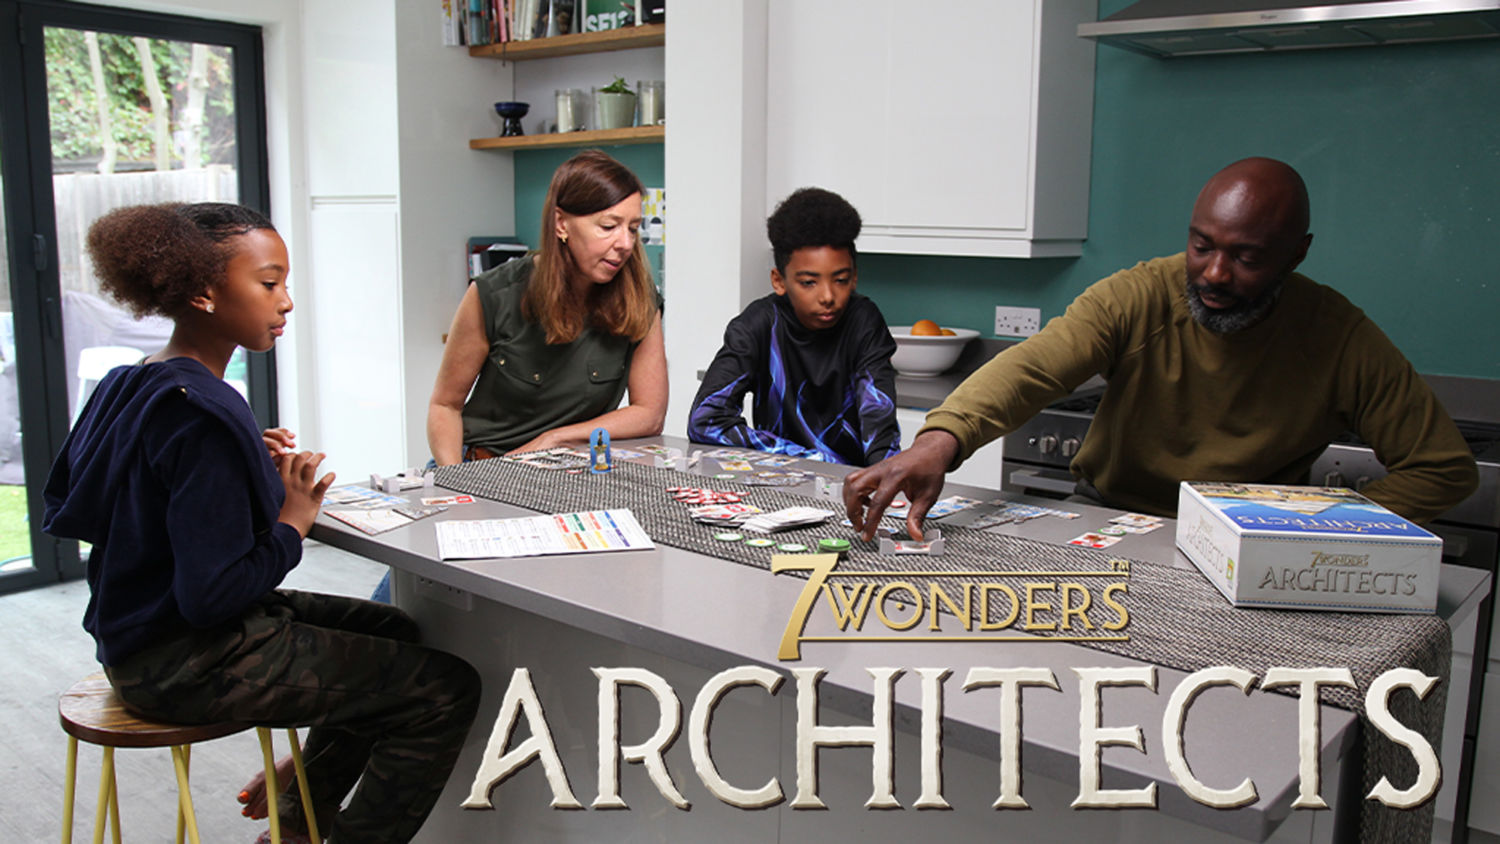 Discover 7 Wonders Architects, a family board game - Repos Production